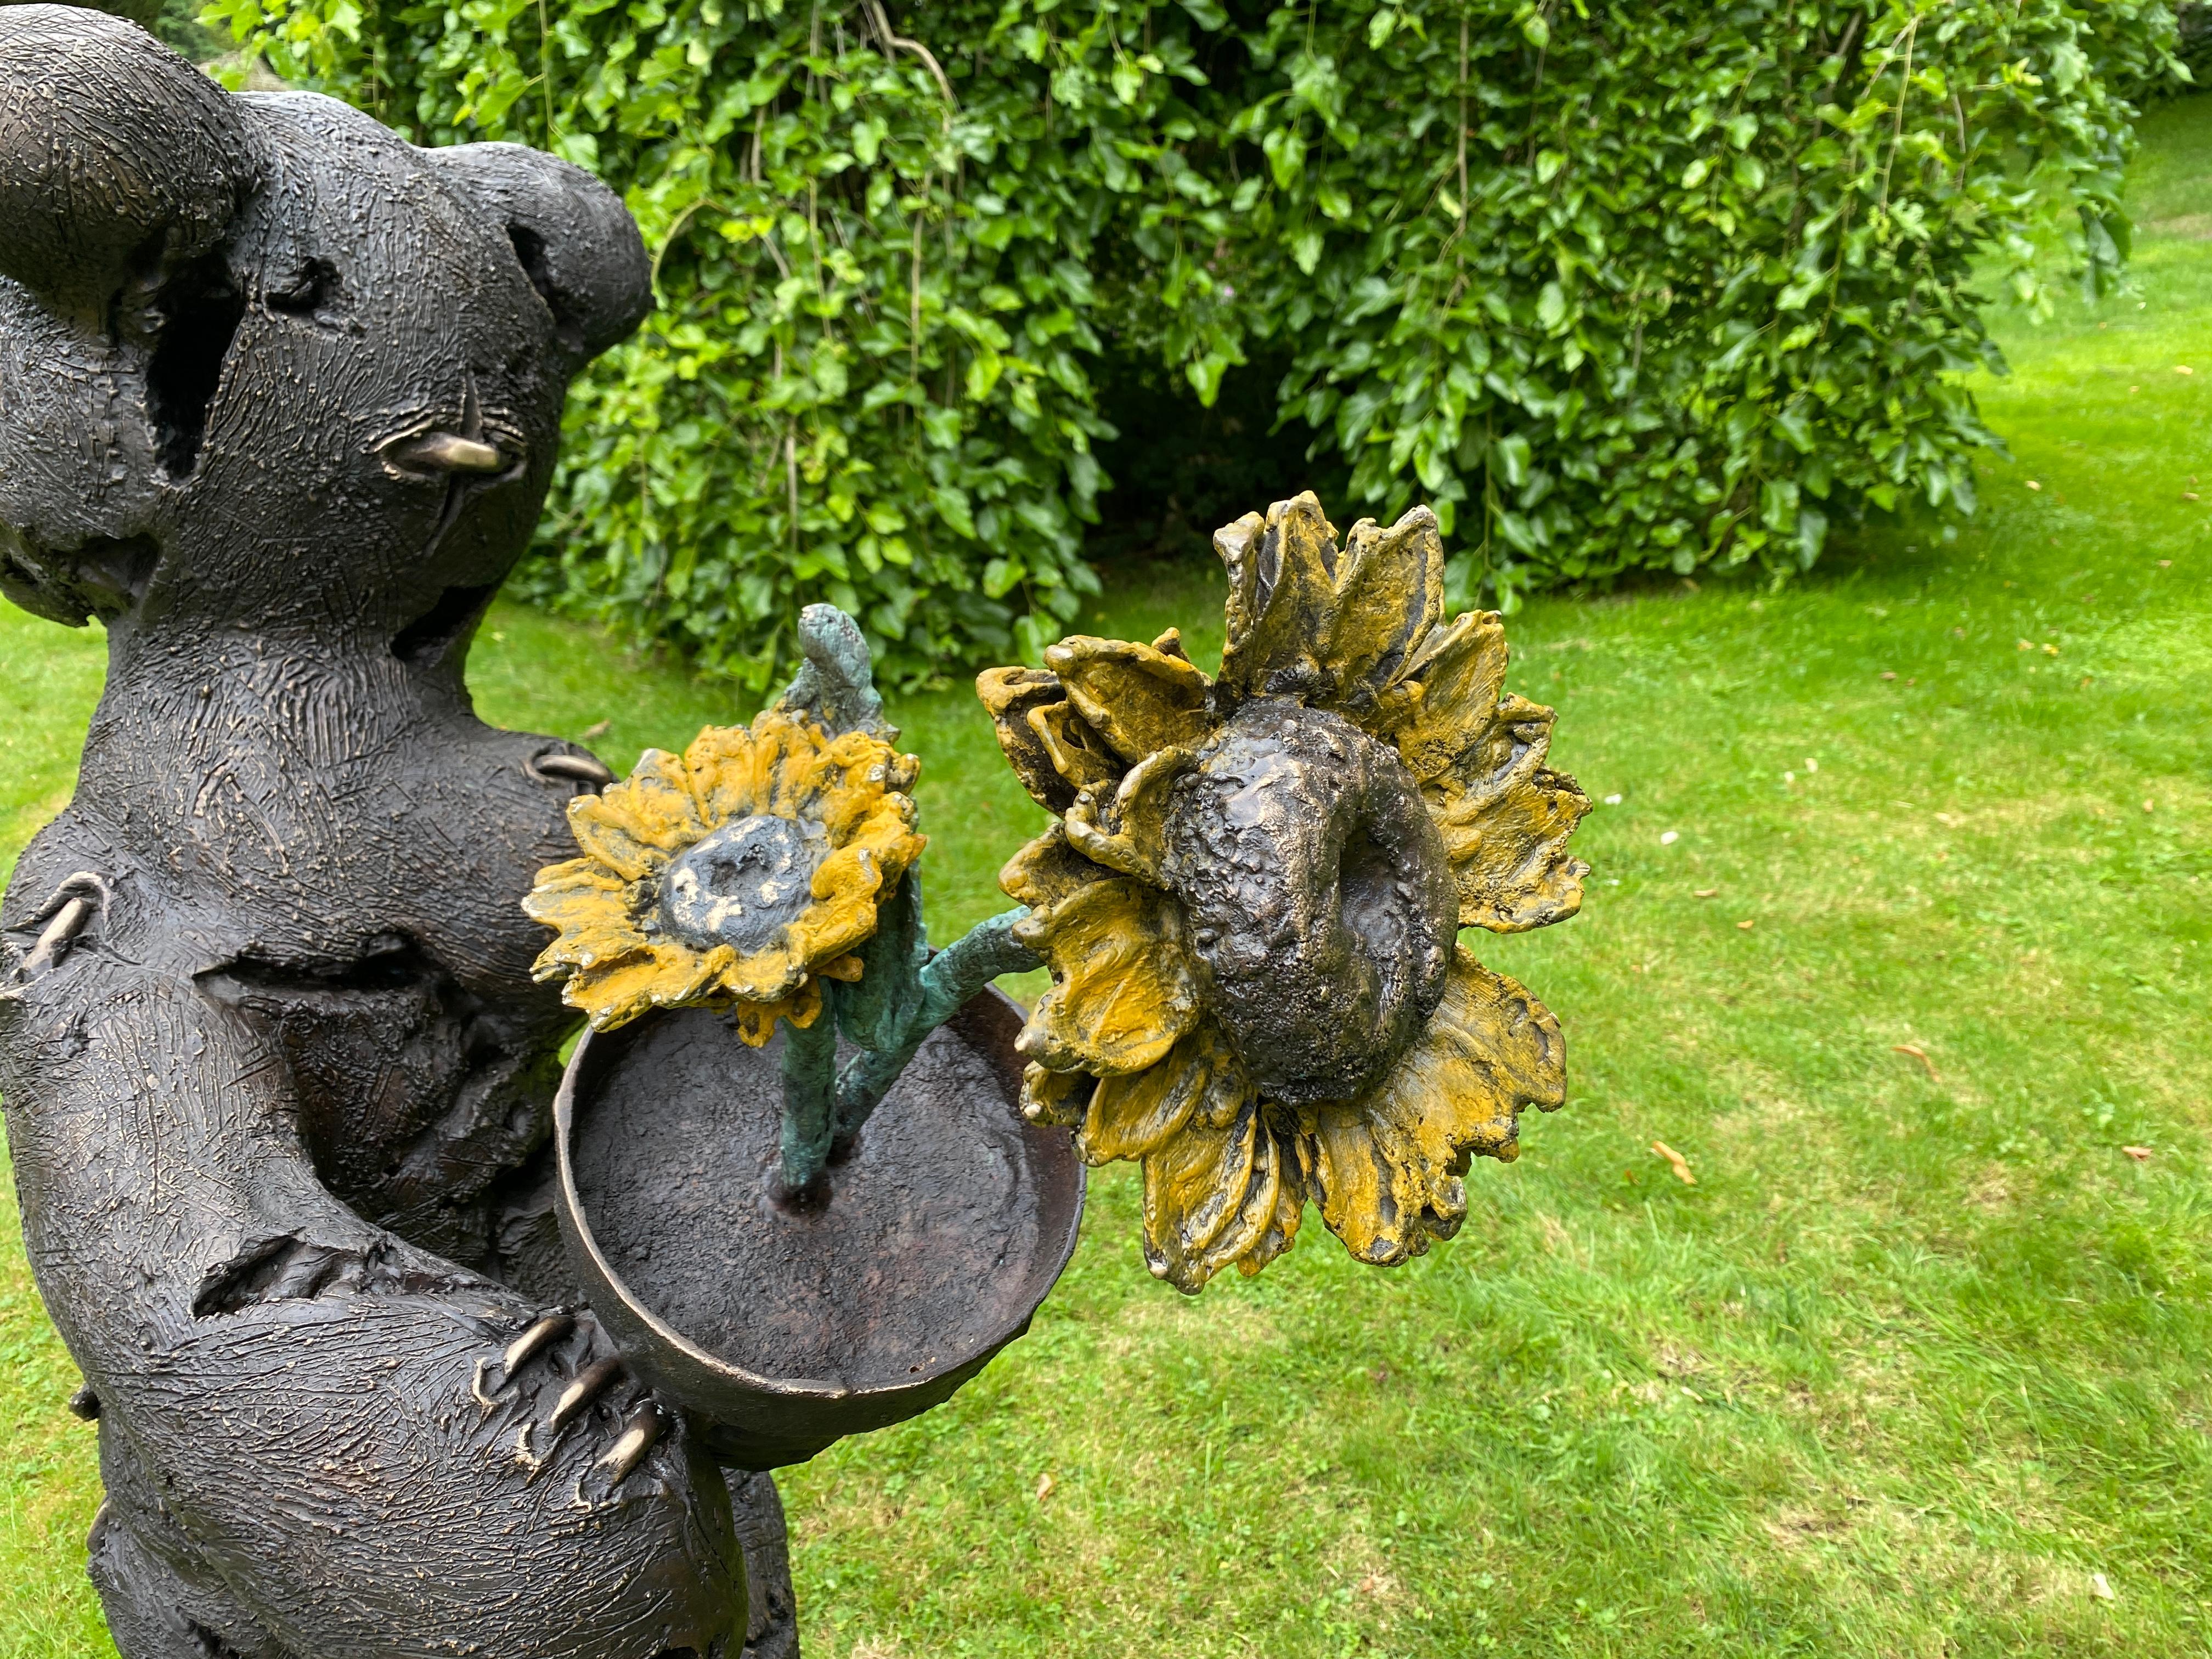 The Gardener with Sunflower - Contemporary Sculpture by Patrick O'Reilly